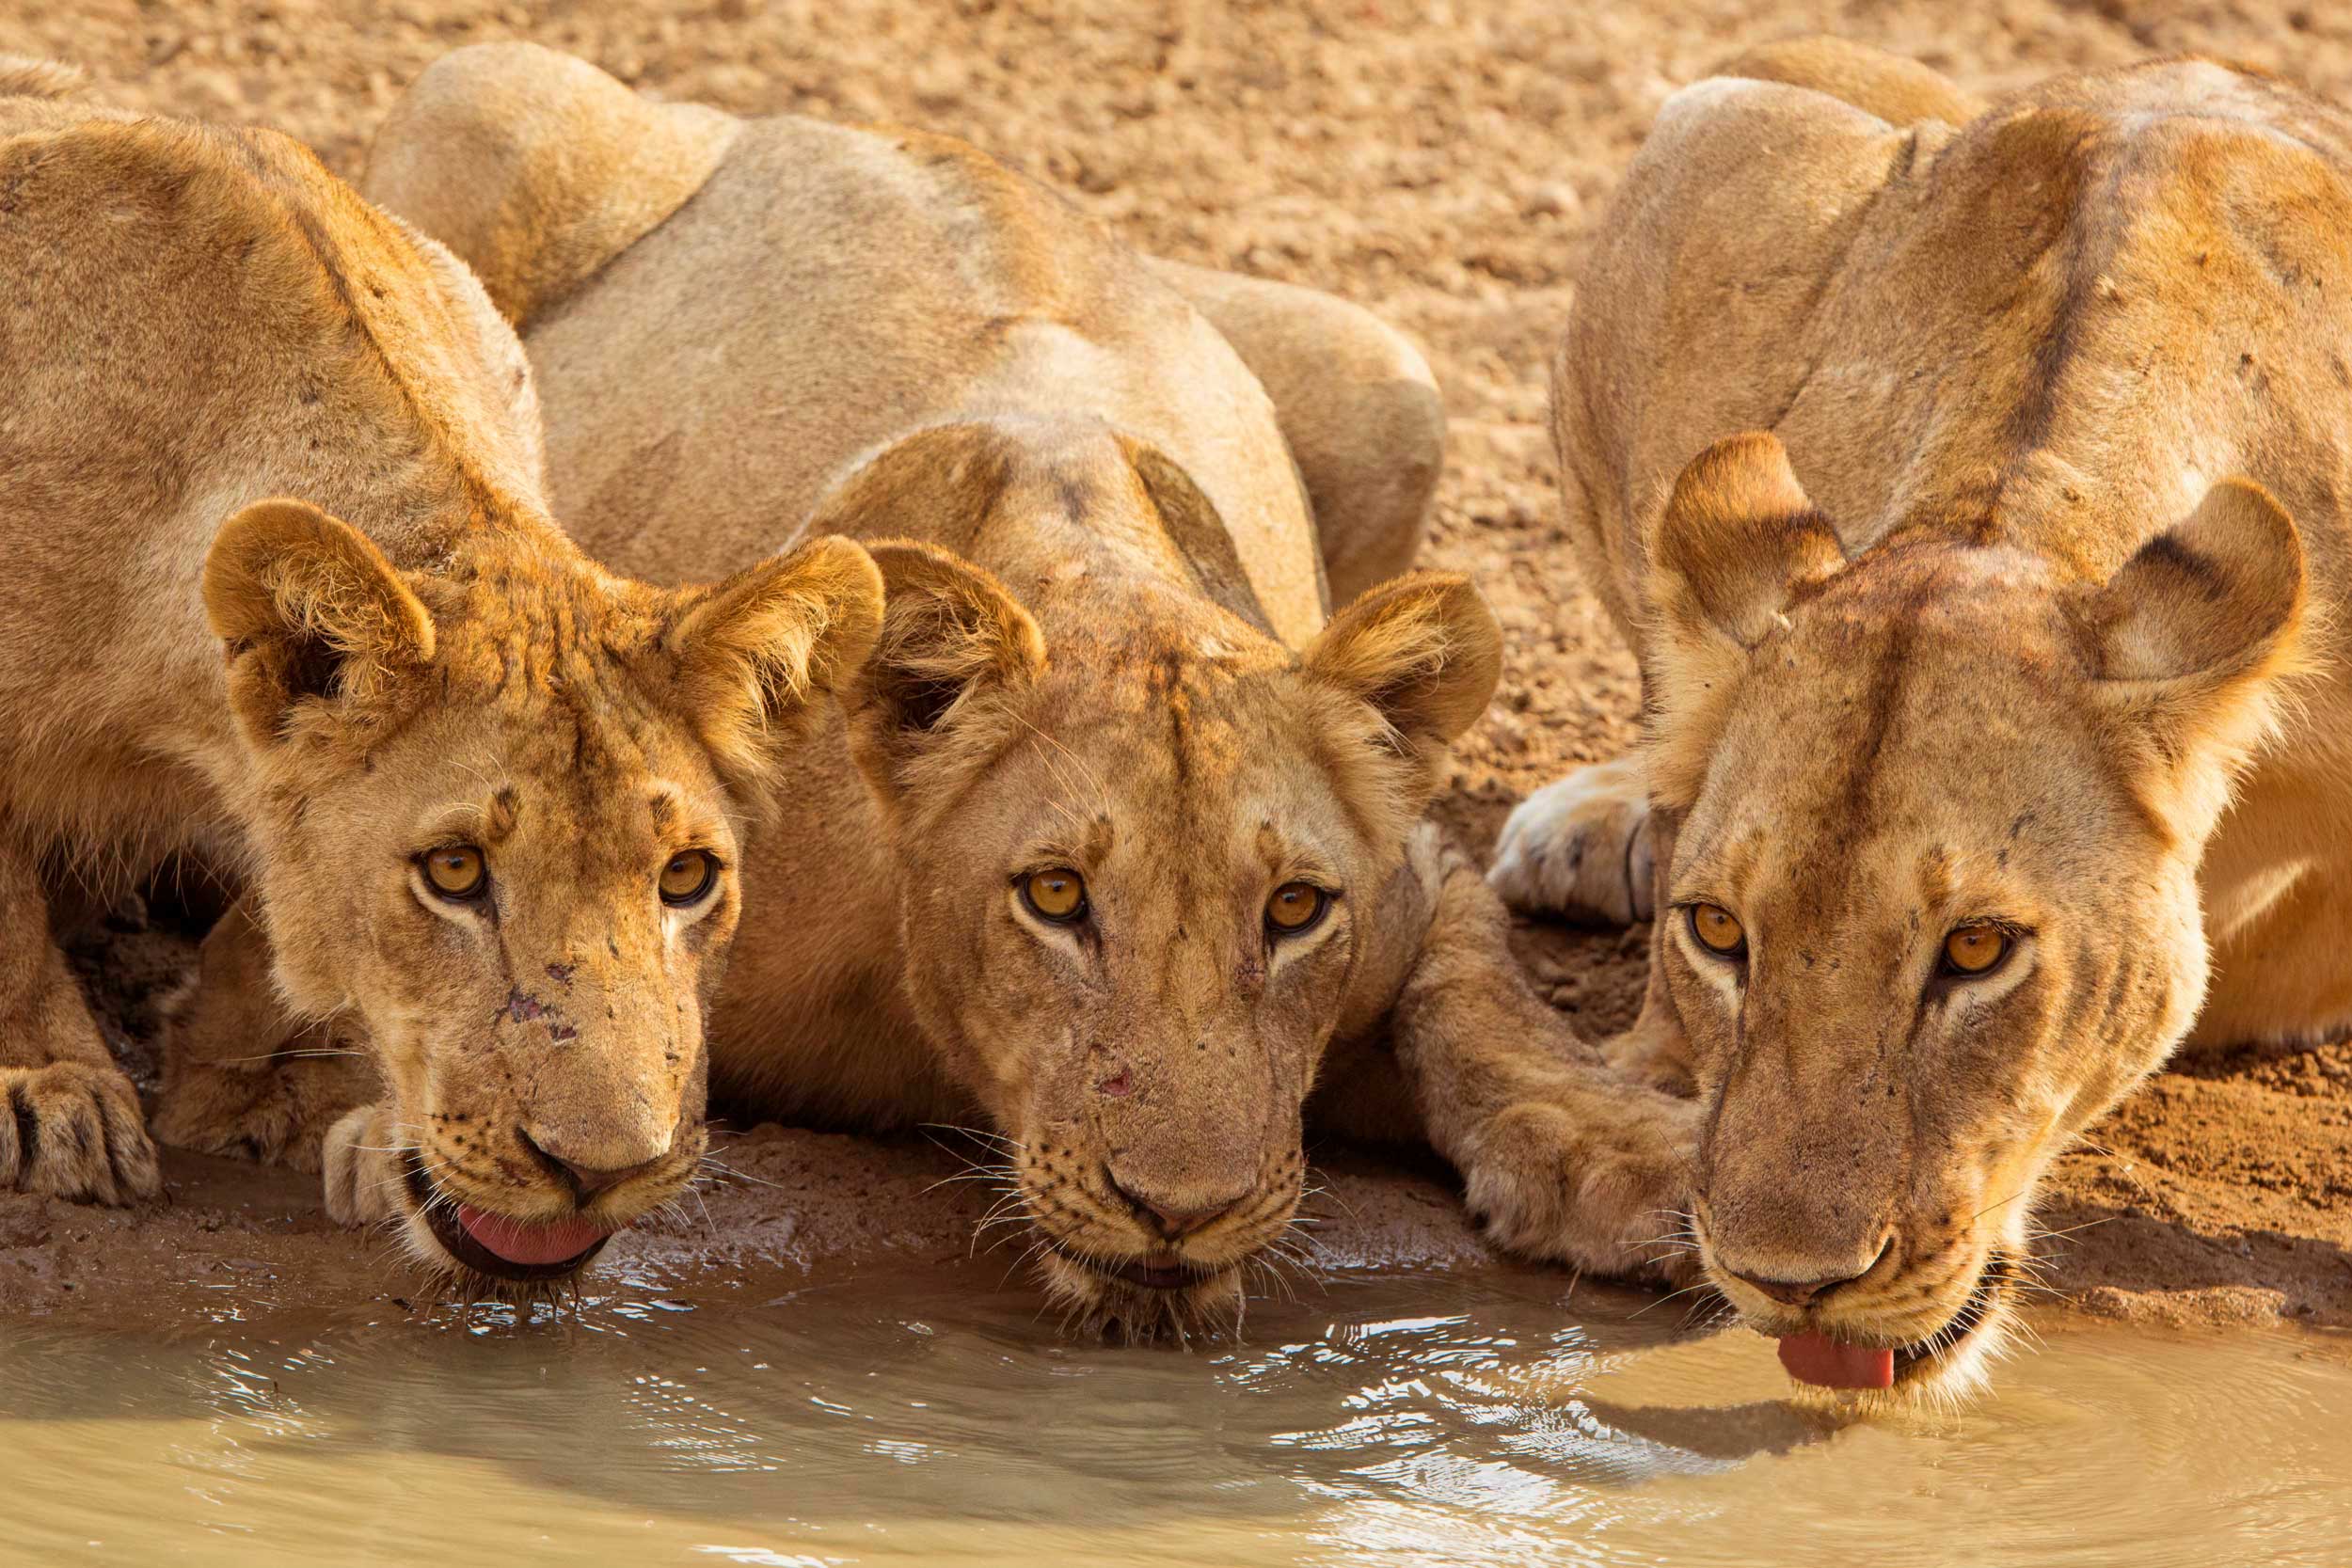 Three lions staring at camera while crouched and drinking water, Zambia